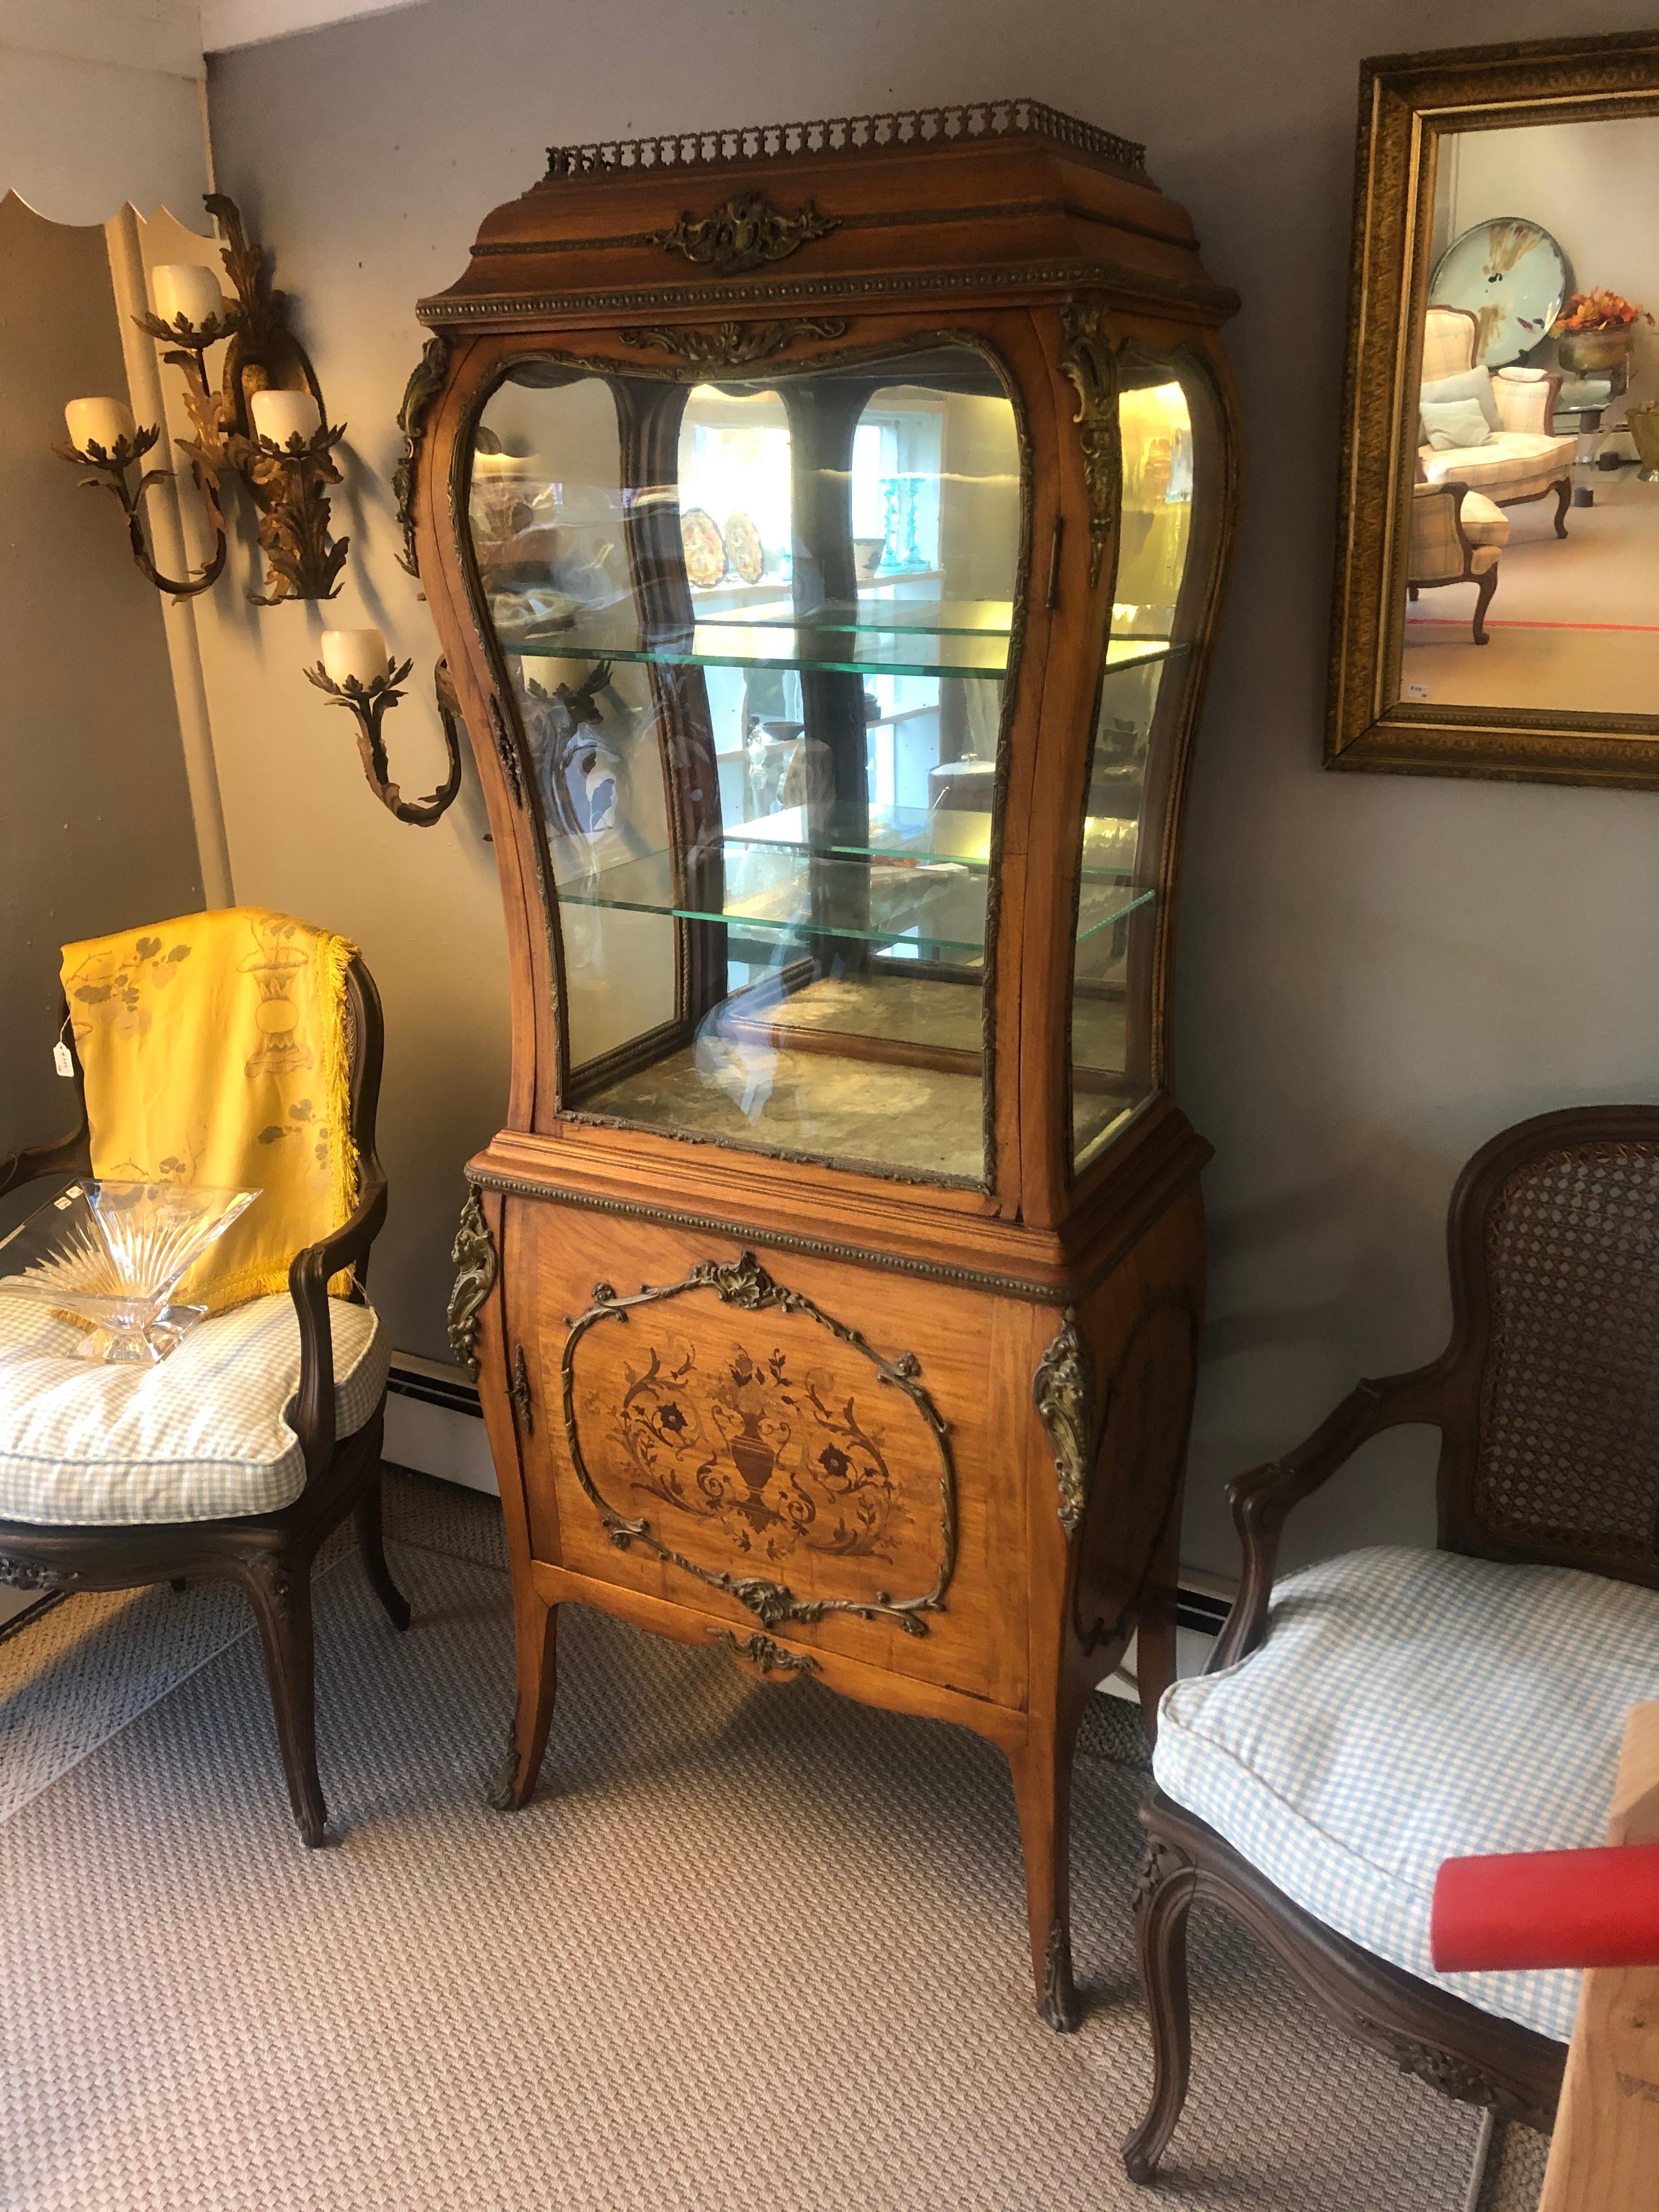 Magnificent and rare 19th century Edwardian inlaid bombe shaped curio cabinet vitrine with sensuous silhouette. Top has original glass on 3 sides to allow elegant display space with two glass shelves, velvet lined bottom and mirrored back. Bottom